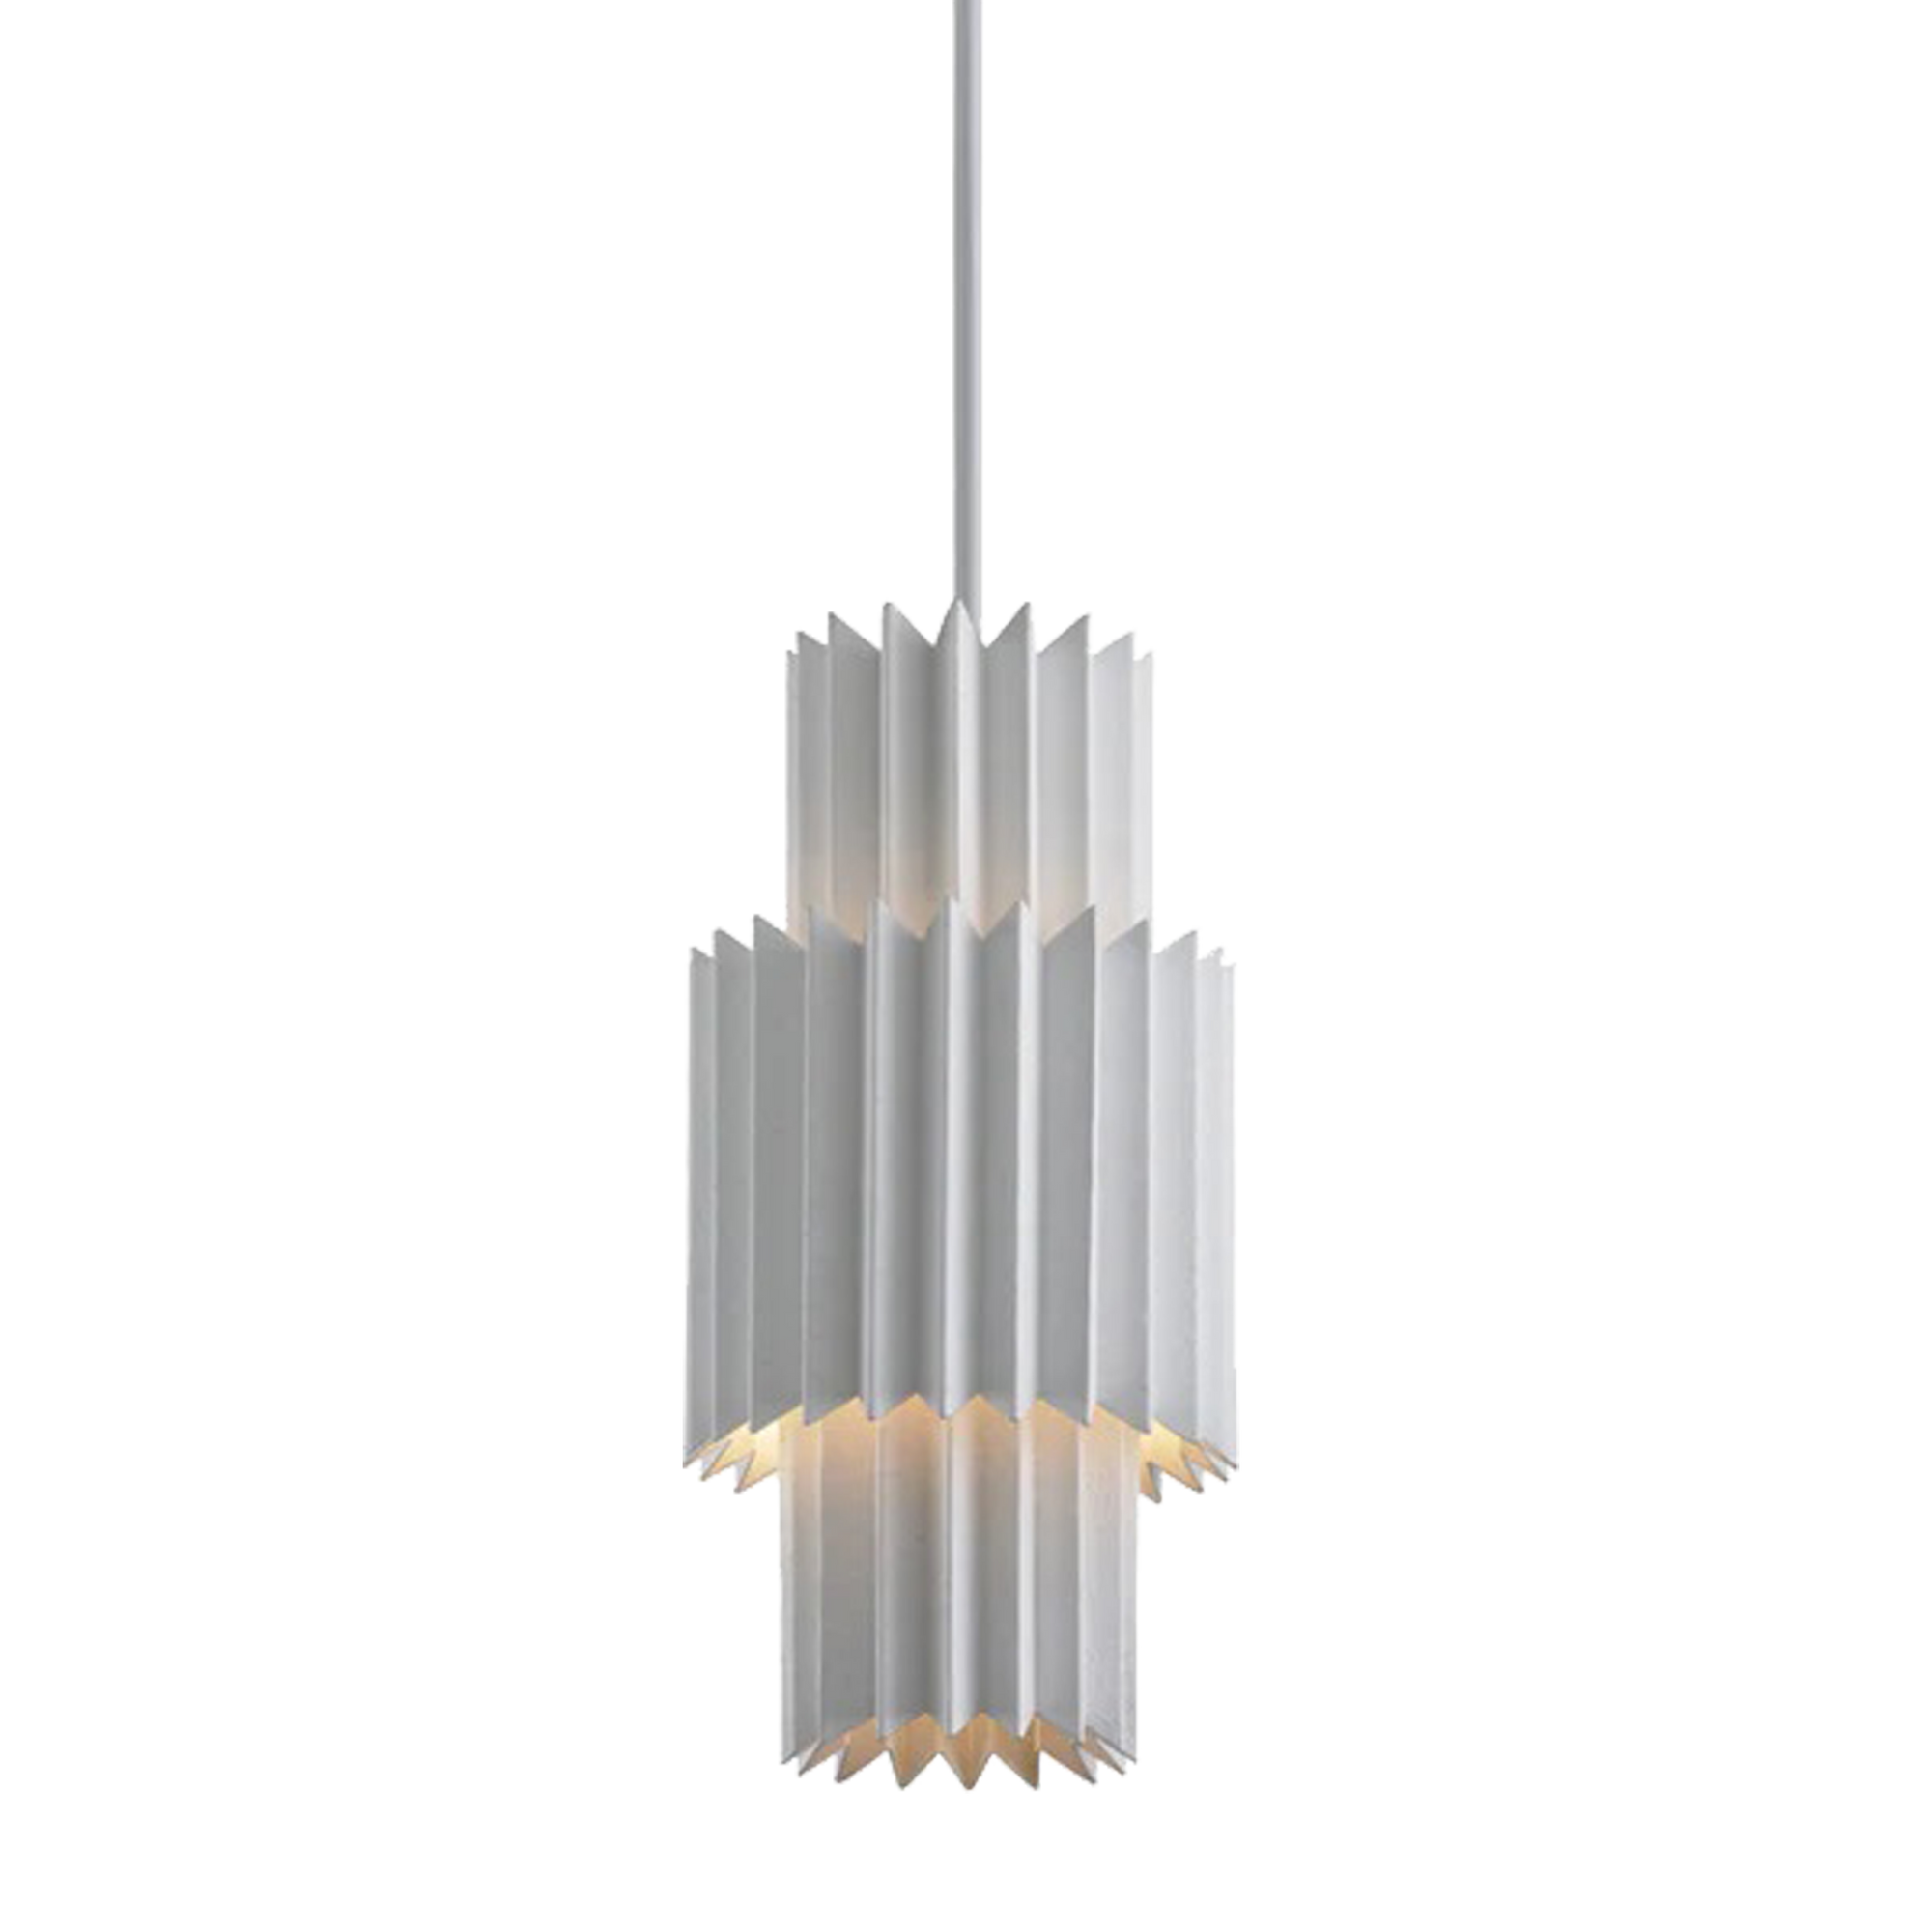 Make a strong architectural statement with the Vasto Pendant that cleverly effuses a warm glow from an elongated angular design that works well hung individually or in multiples.